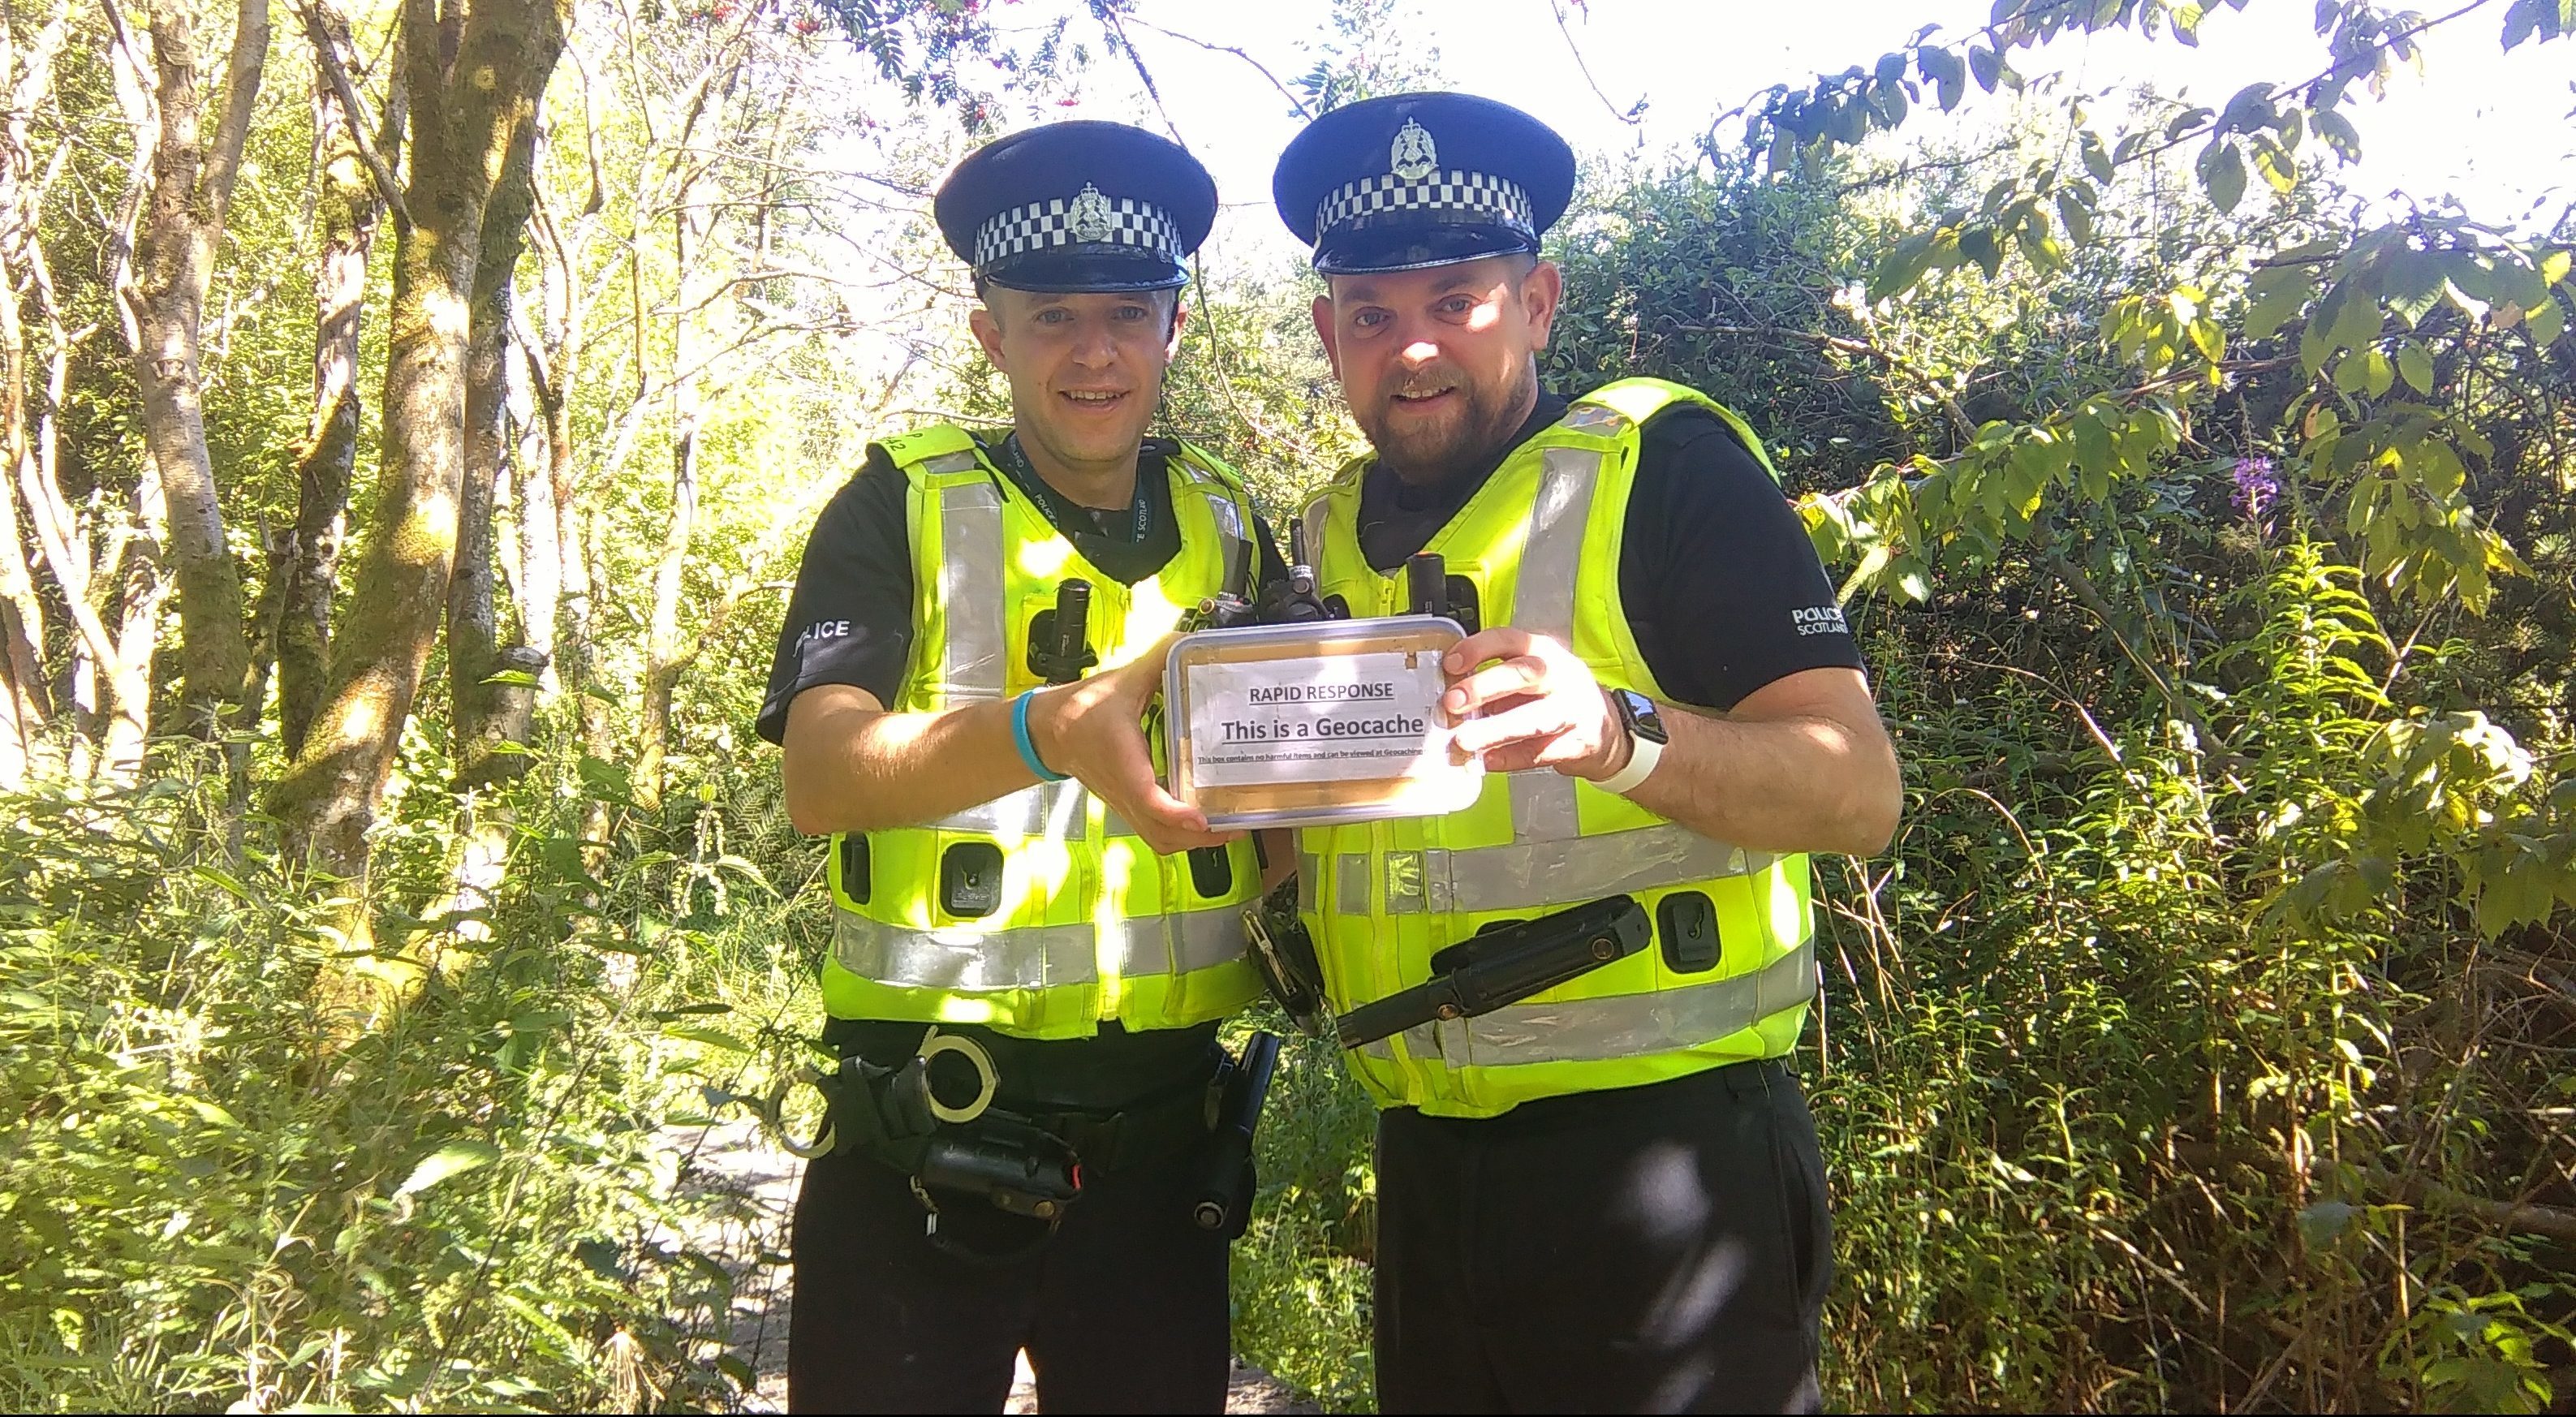 PC Barry Smith and PC Gary Chrystal placing one of the geocaches